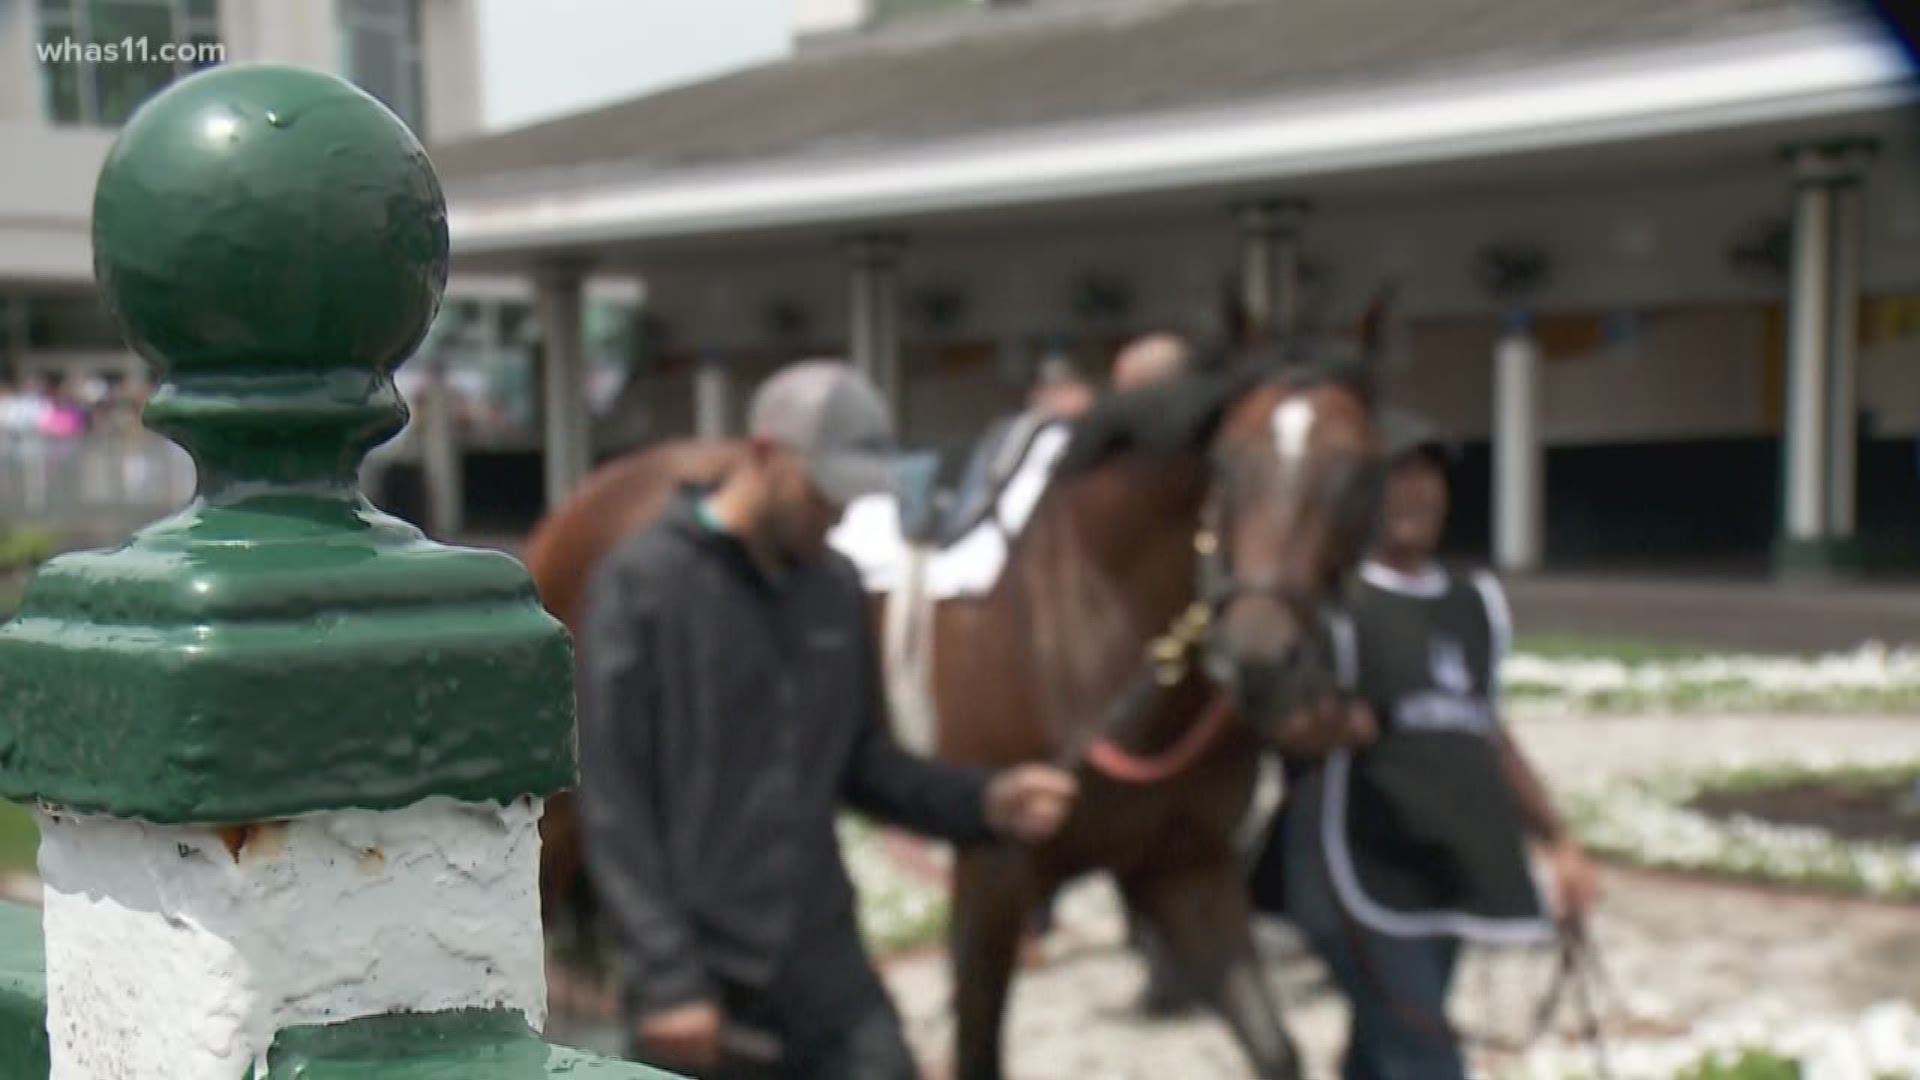 You can't come to Churchill Downs and not place a bet, even if it's just a small one.